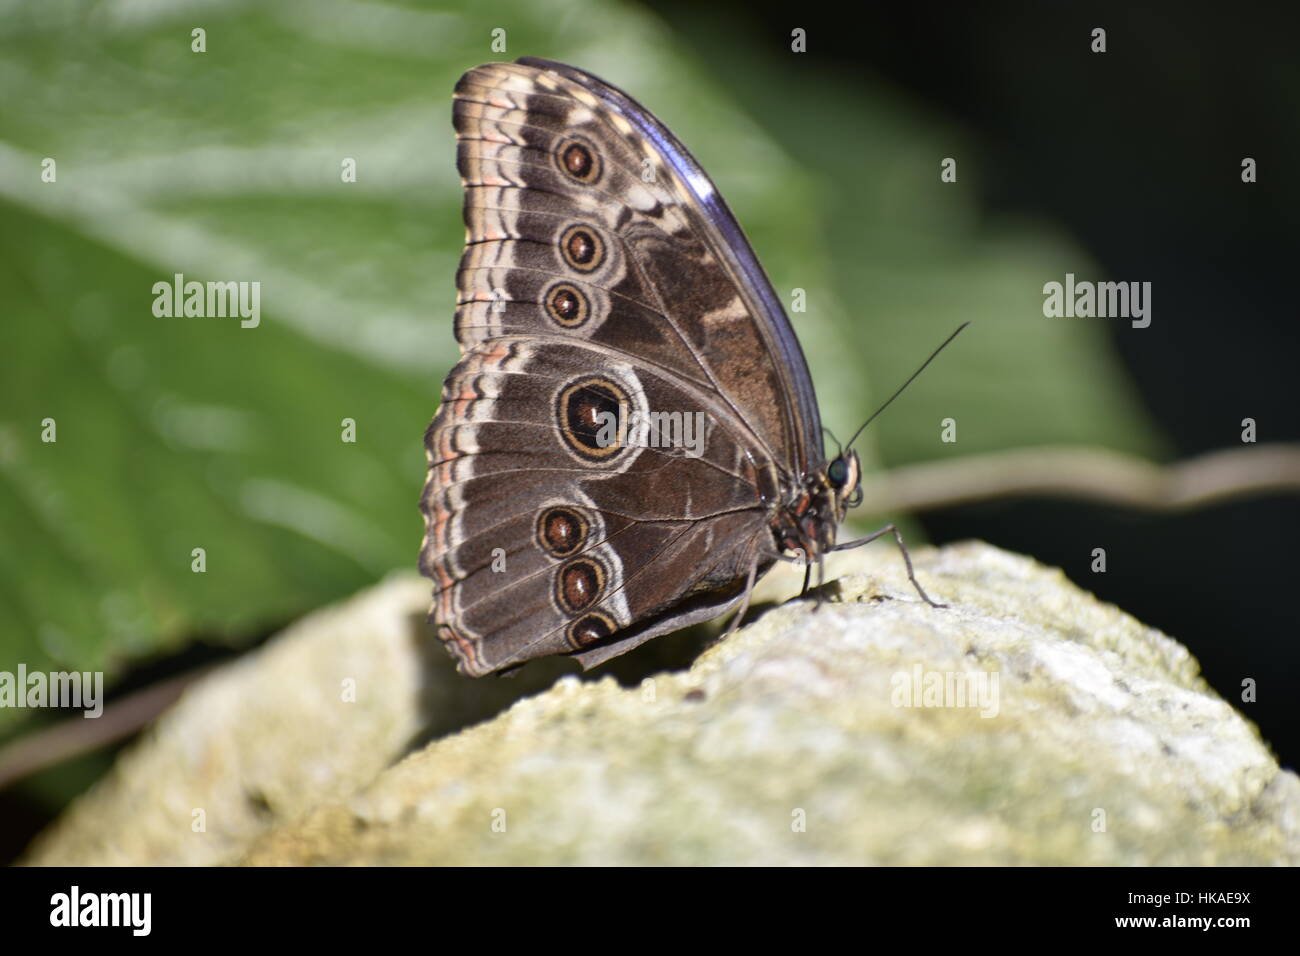 Beautiful brown, black, and blue butterfly standing on a rock preparing for takeoff Stock Photo